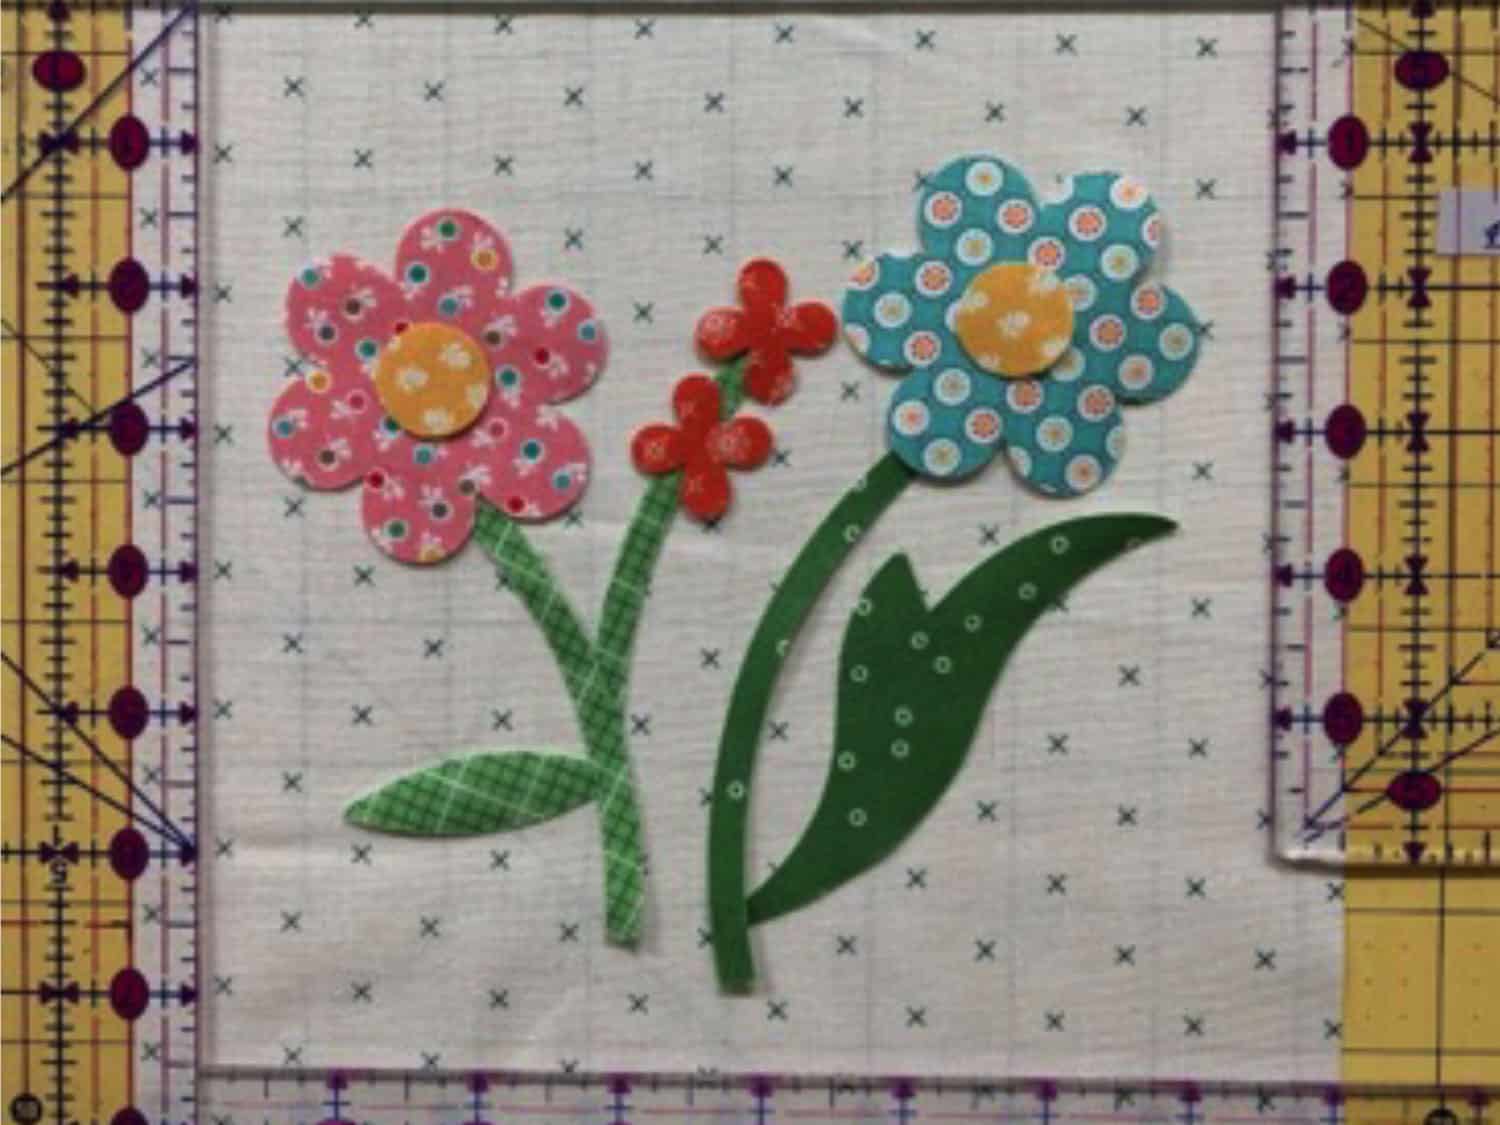 applique pieces for seed keeper